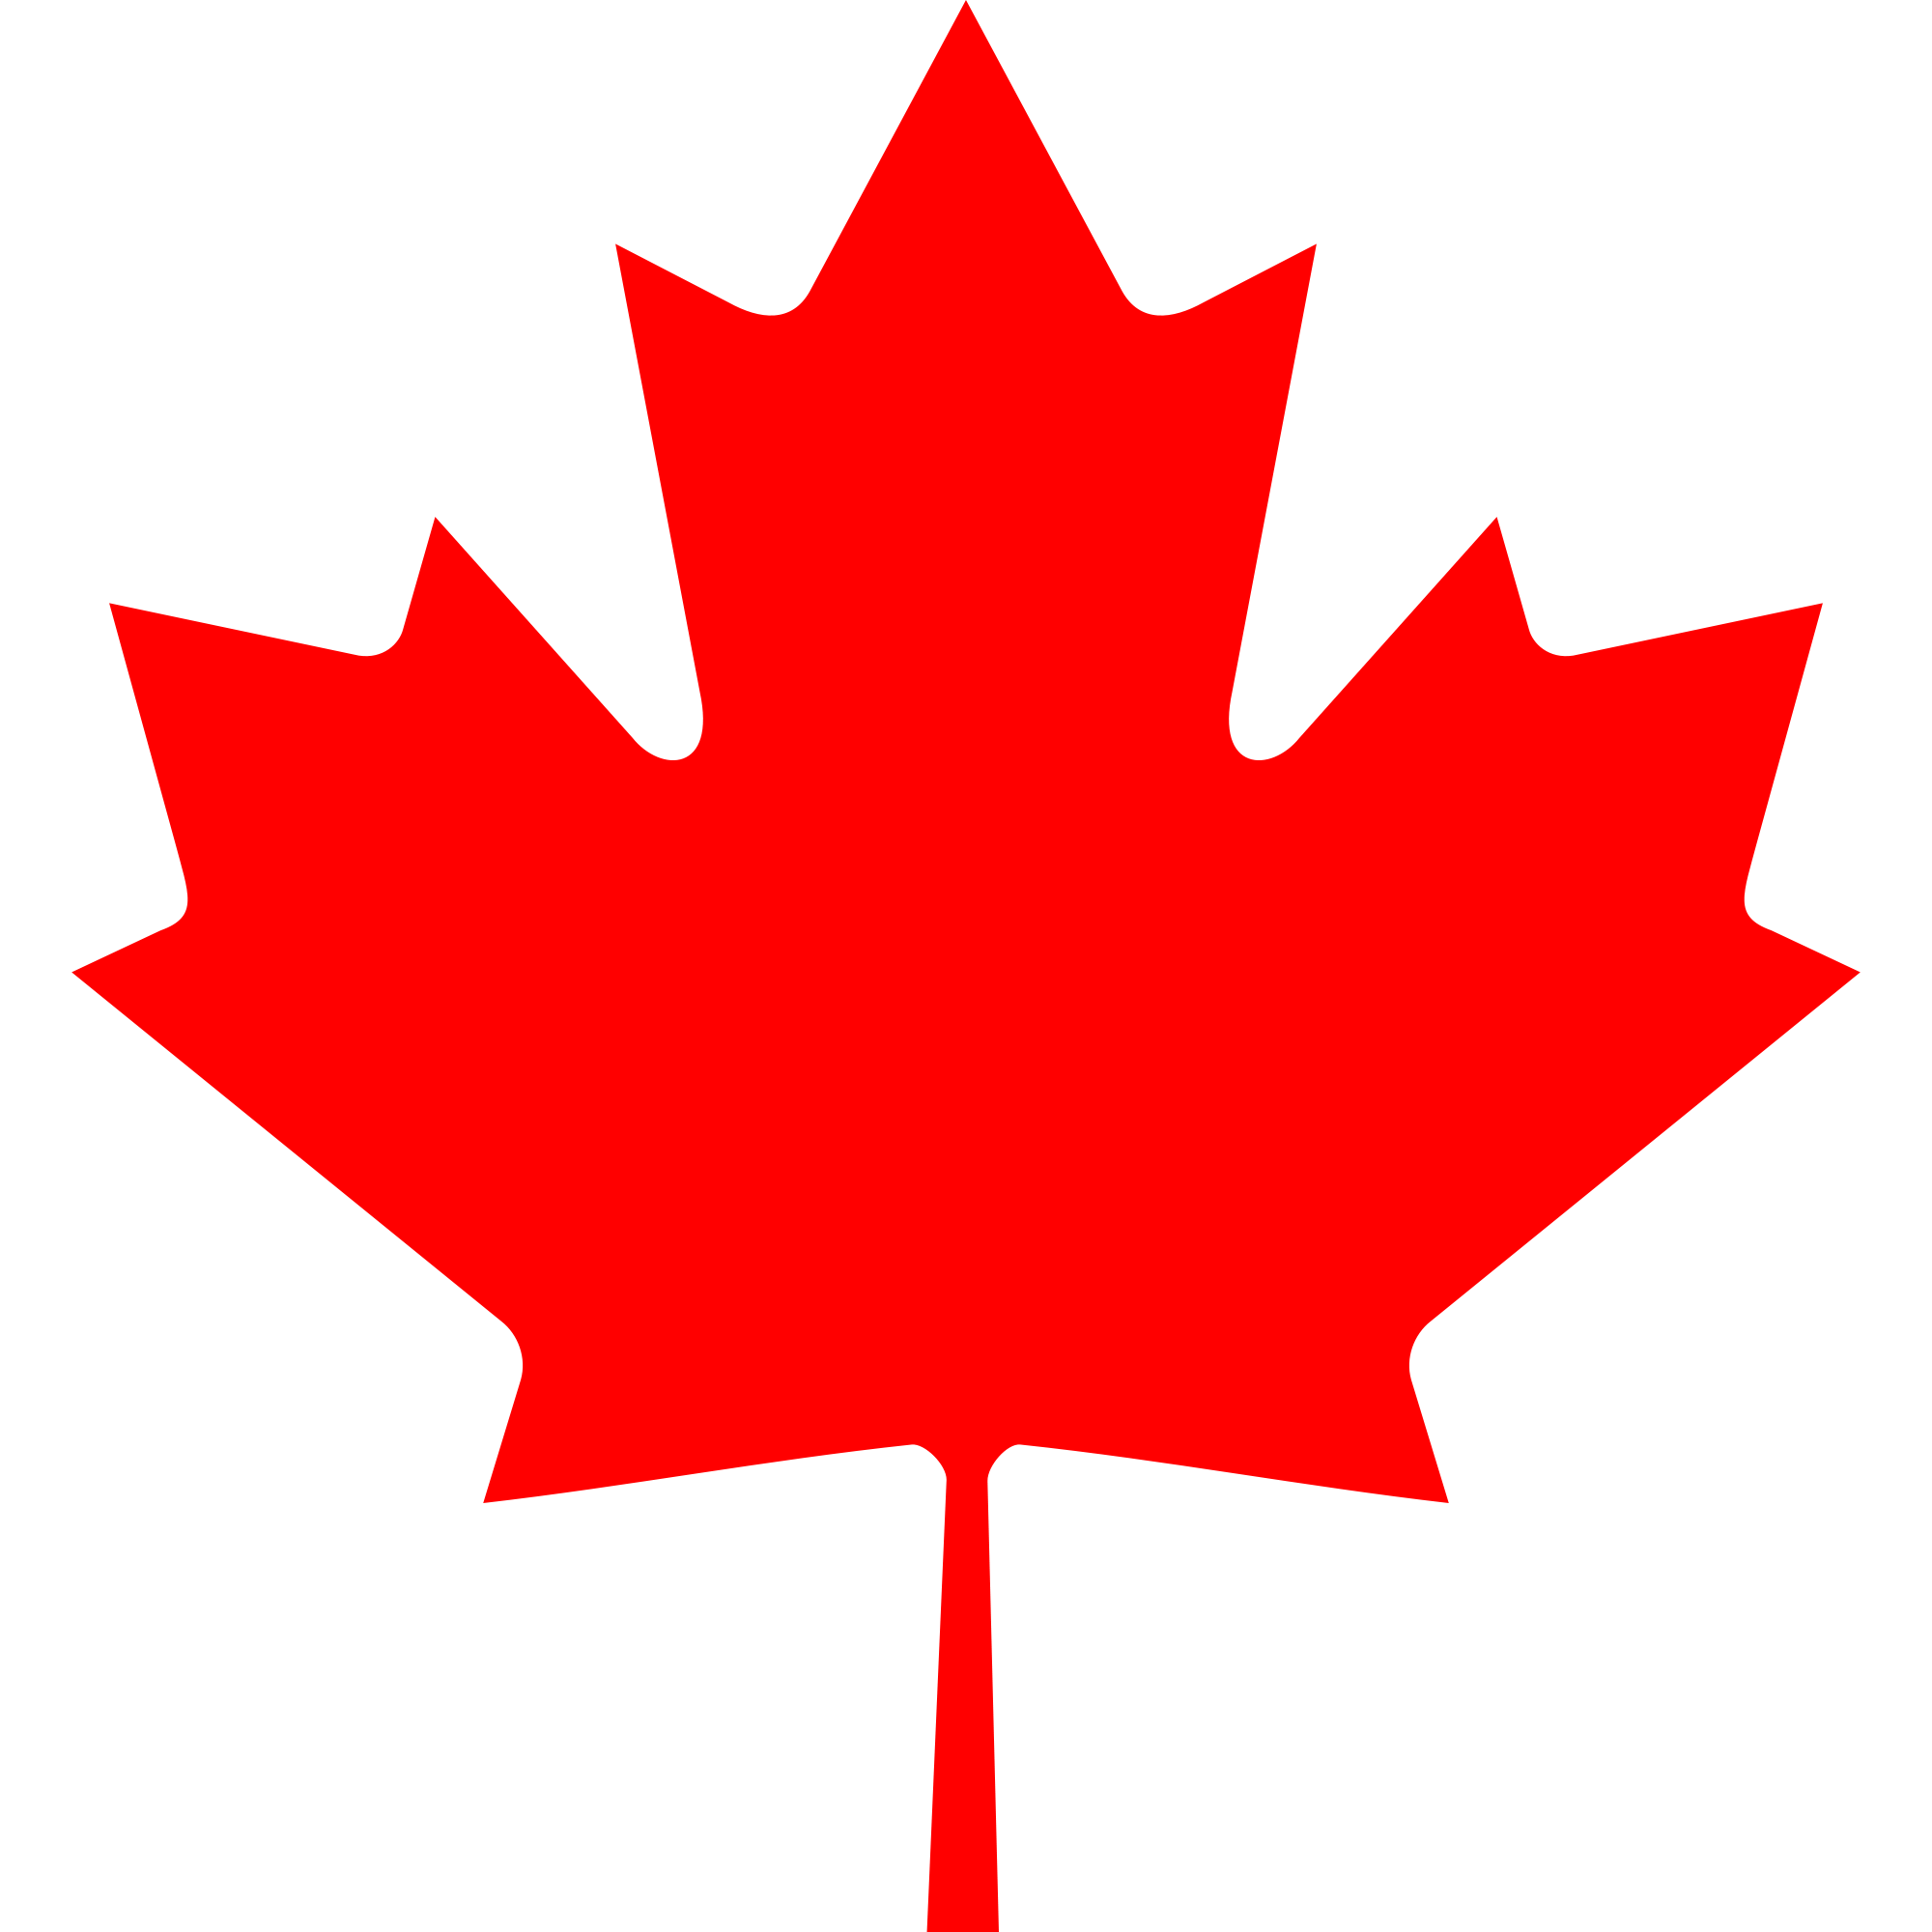 File:Maple Leaf.svg - Wikimedia Commons